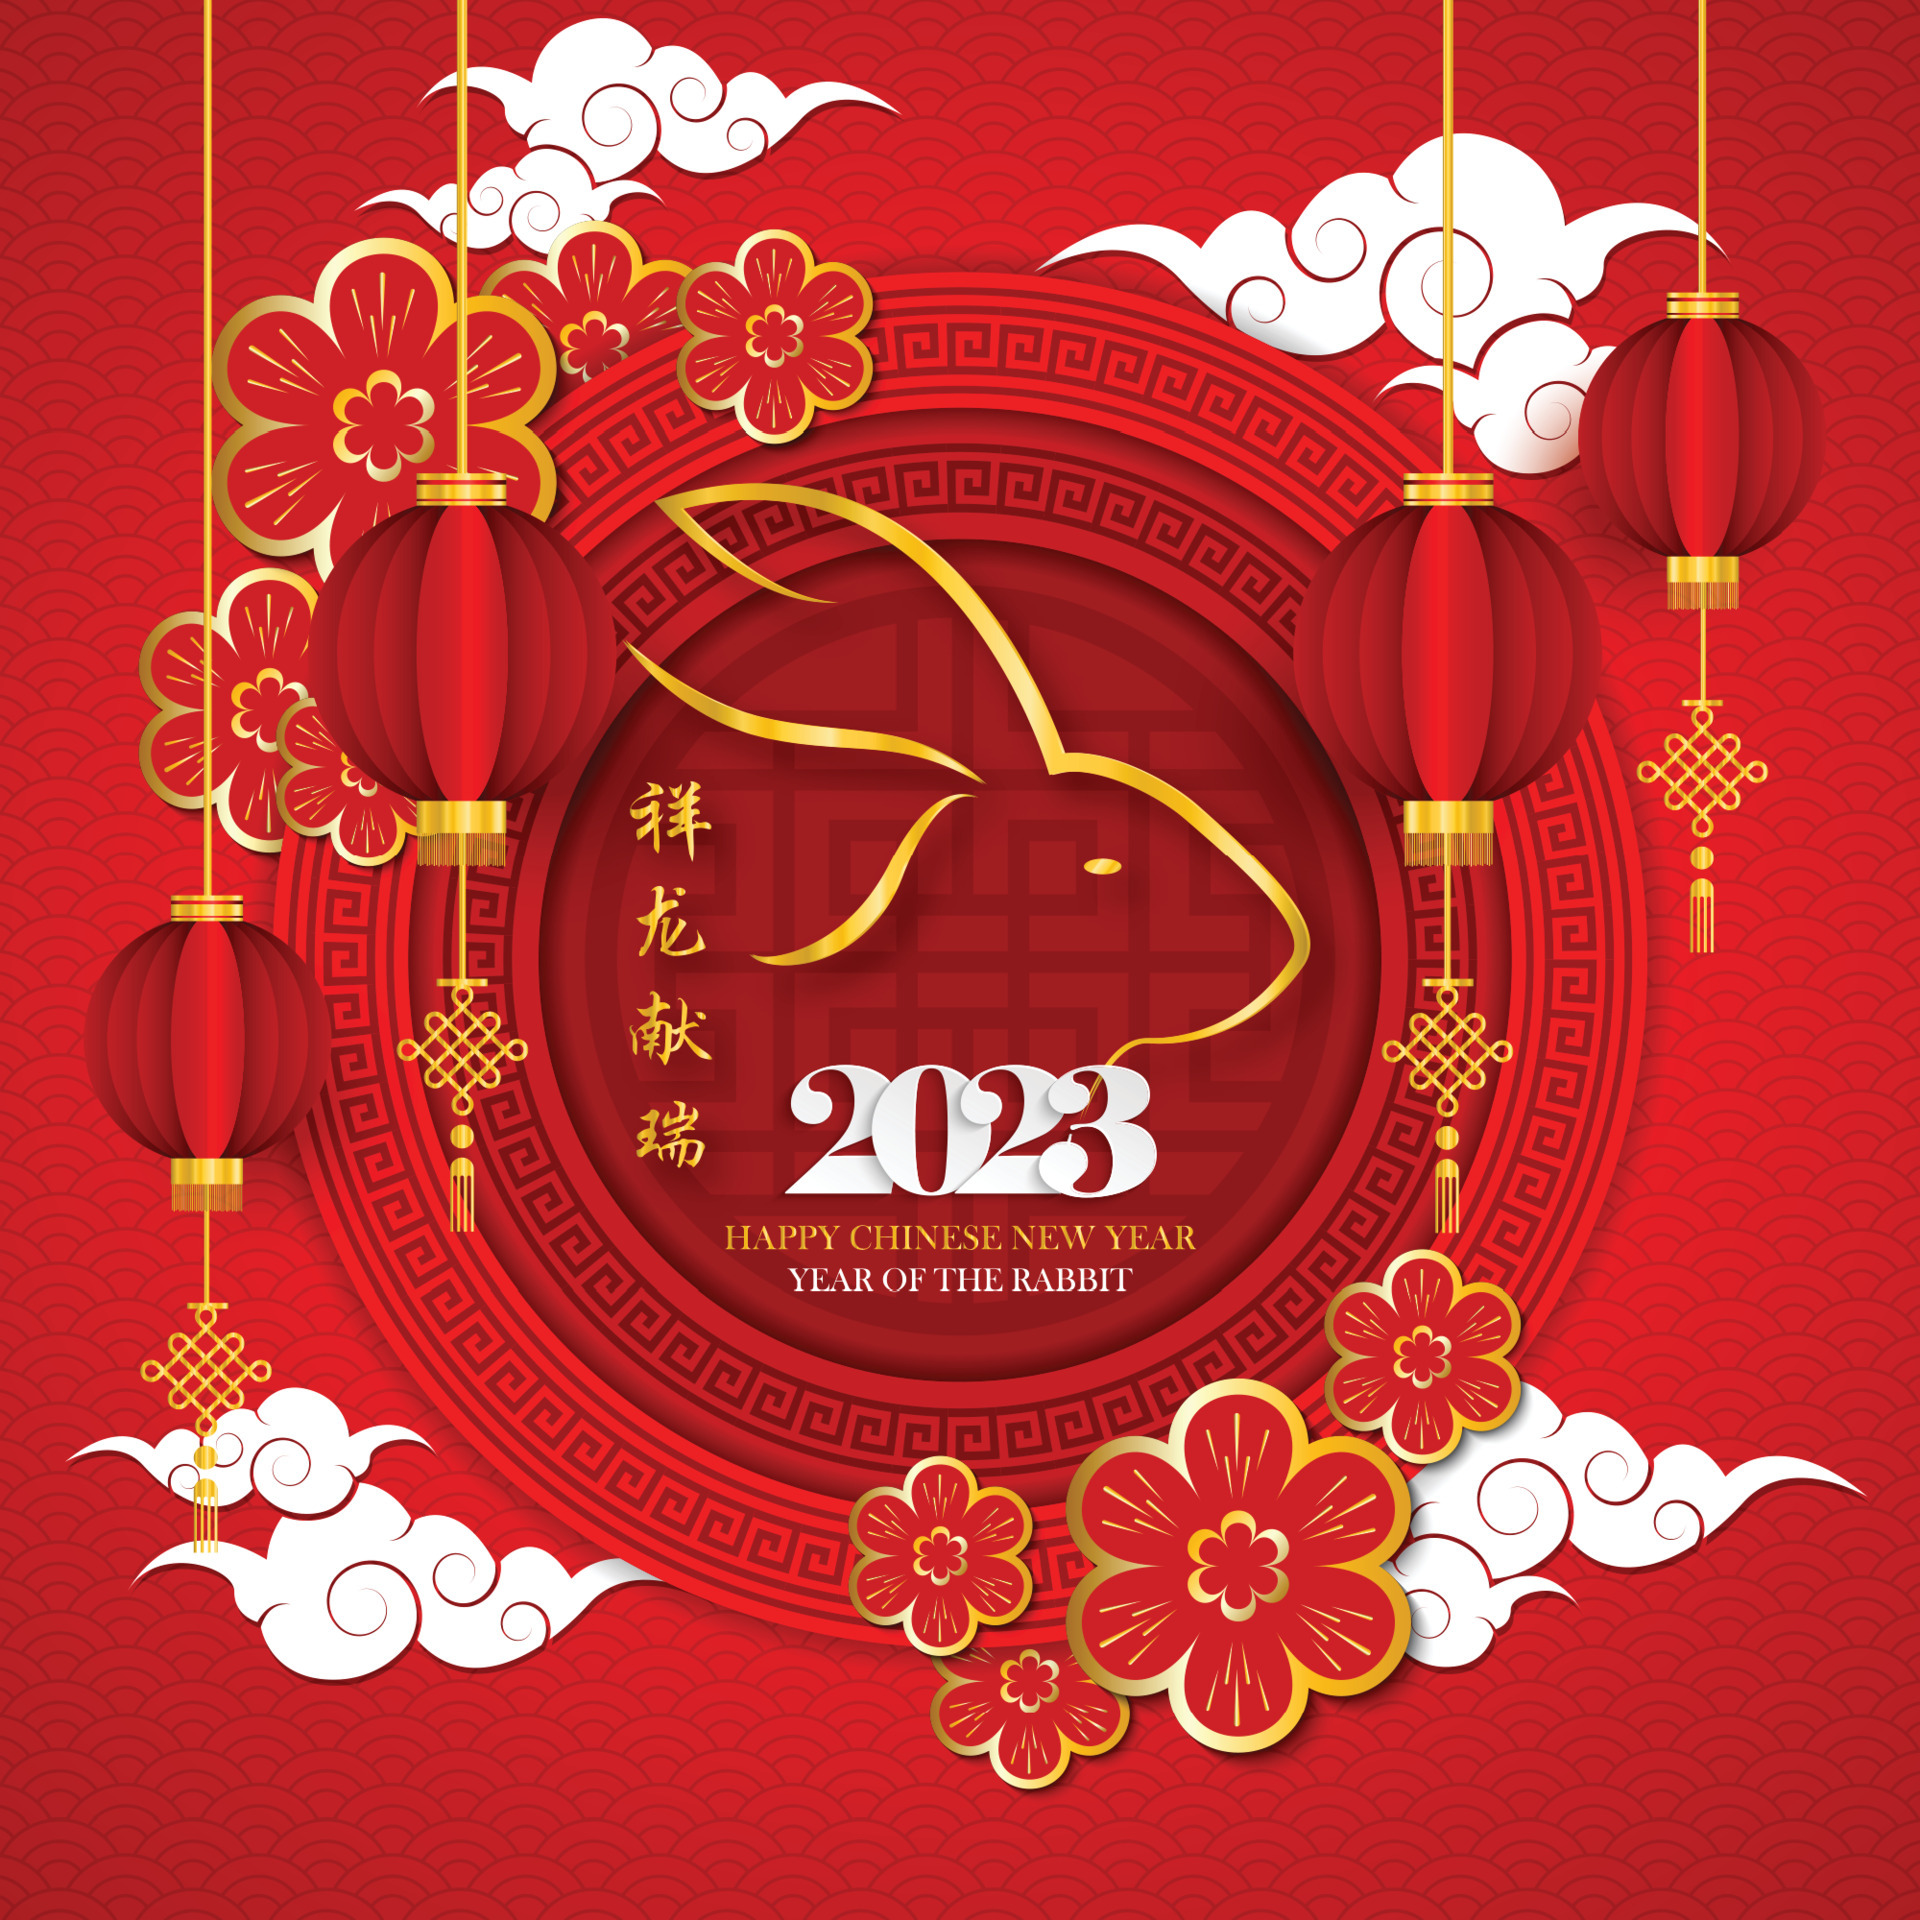 Chinese New Year 2023 Wallpapers - Wallpaper Cave